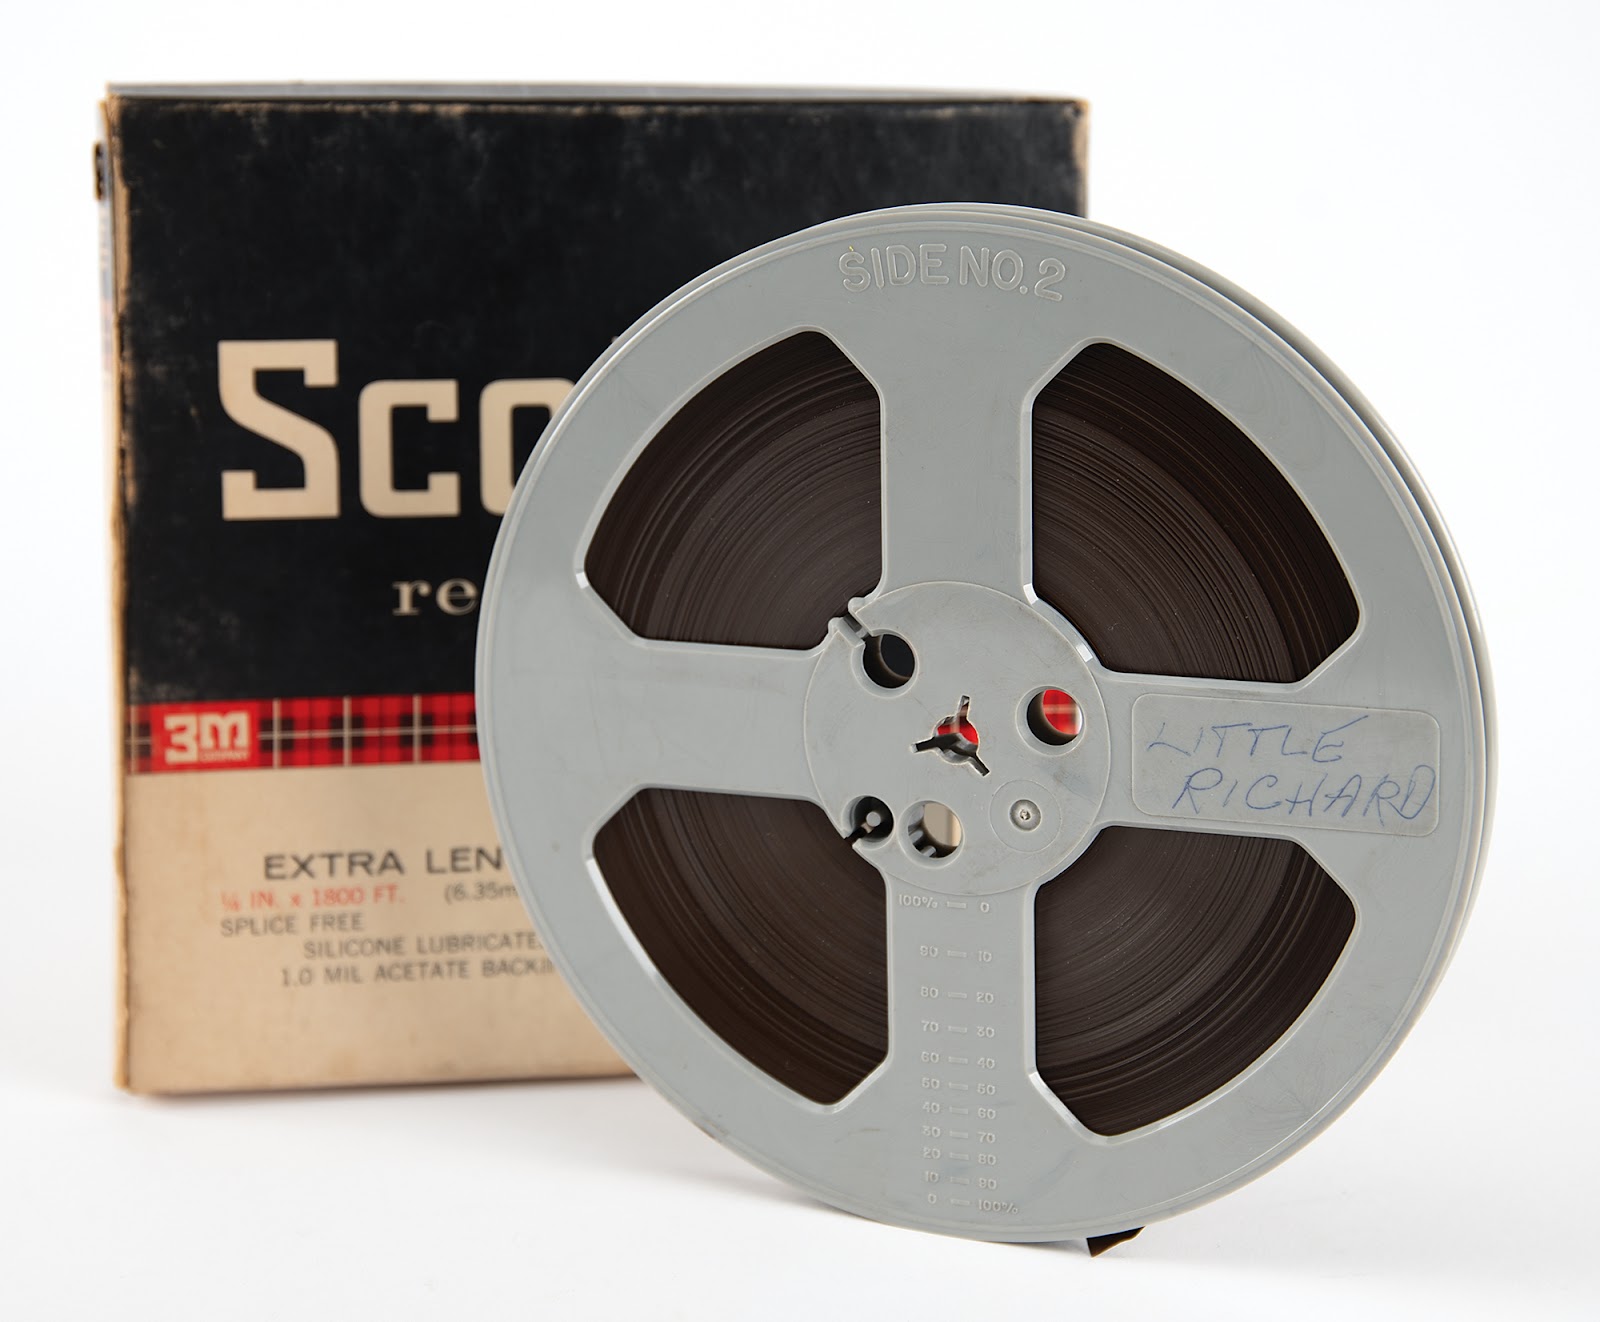 Scotch reel tape of Little Richard’s 1965 performance with Jimi Hendrix, complete with its original box. Sold by RR Auction for $51,644.